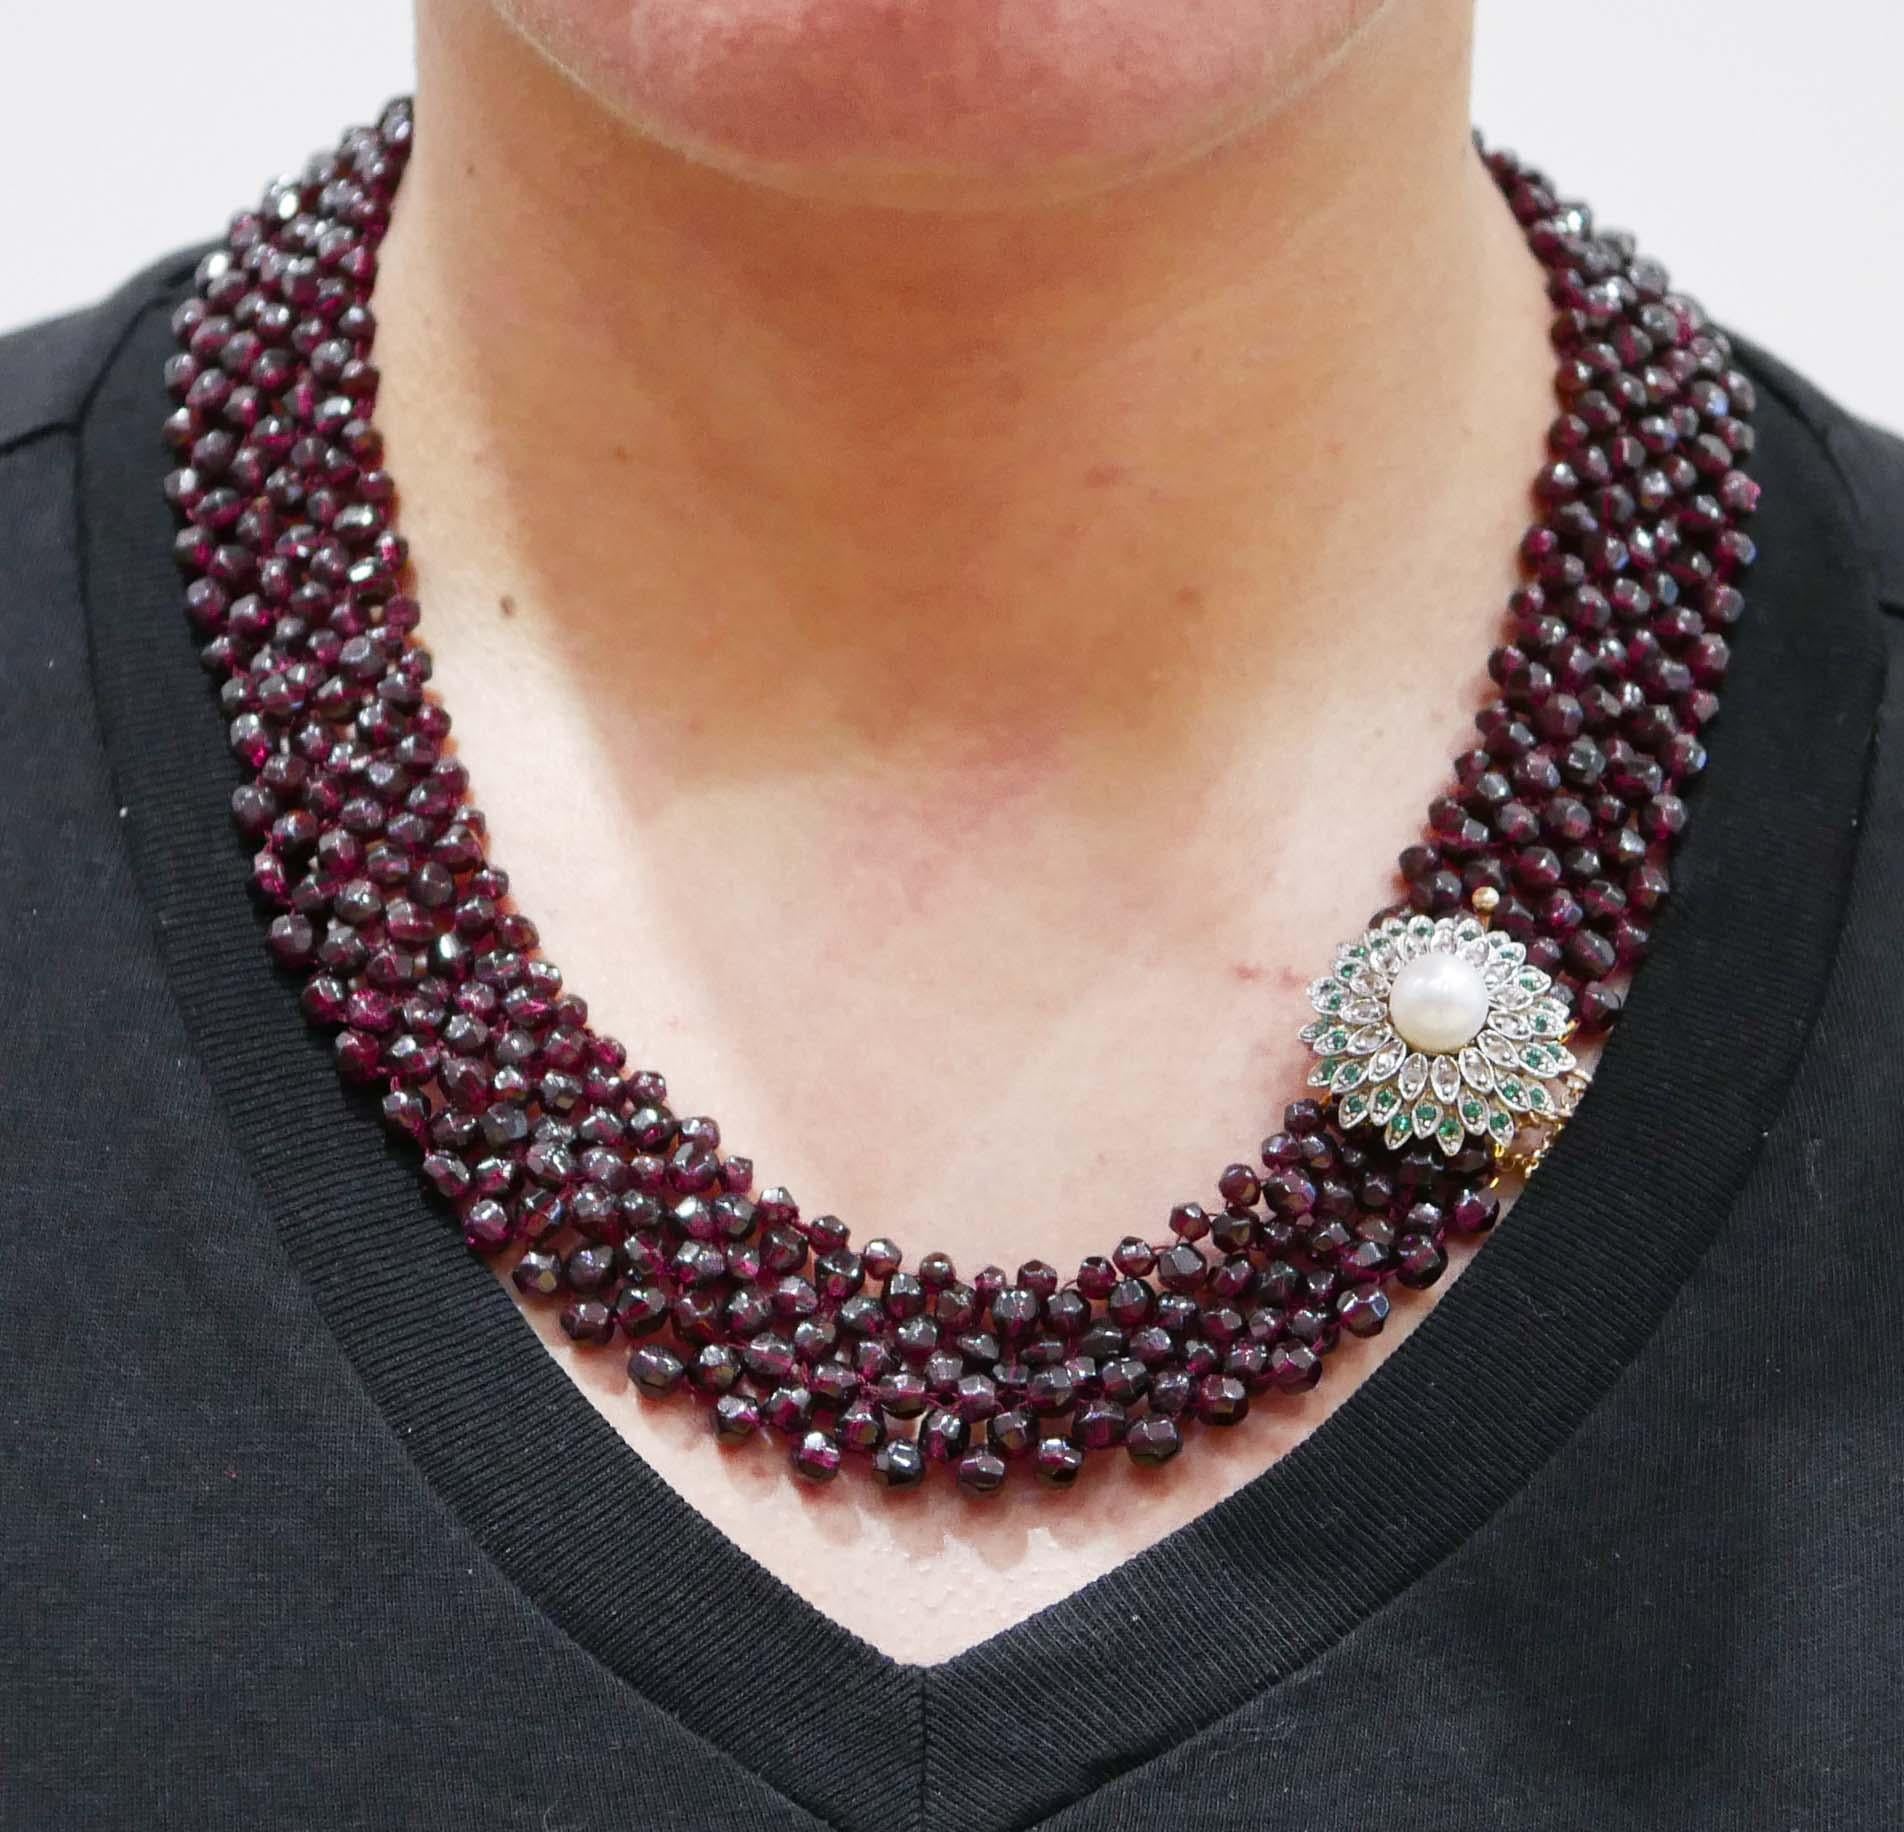 Women's Garnets, Hydrothermal Spinel, Diamonds, Pearl, Rose Gold and Silver Necklace. For Sale